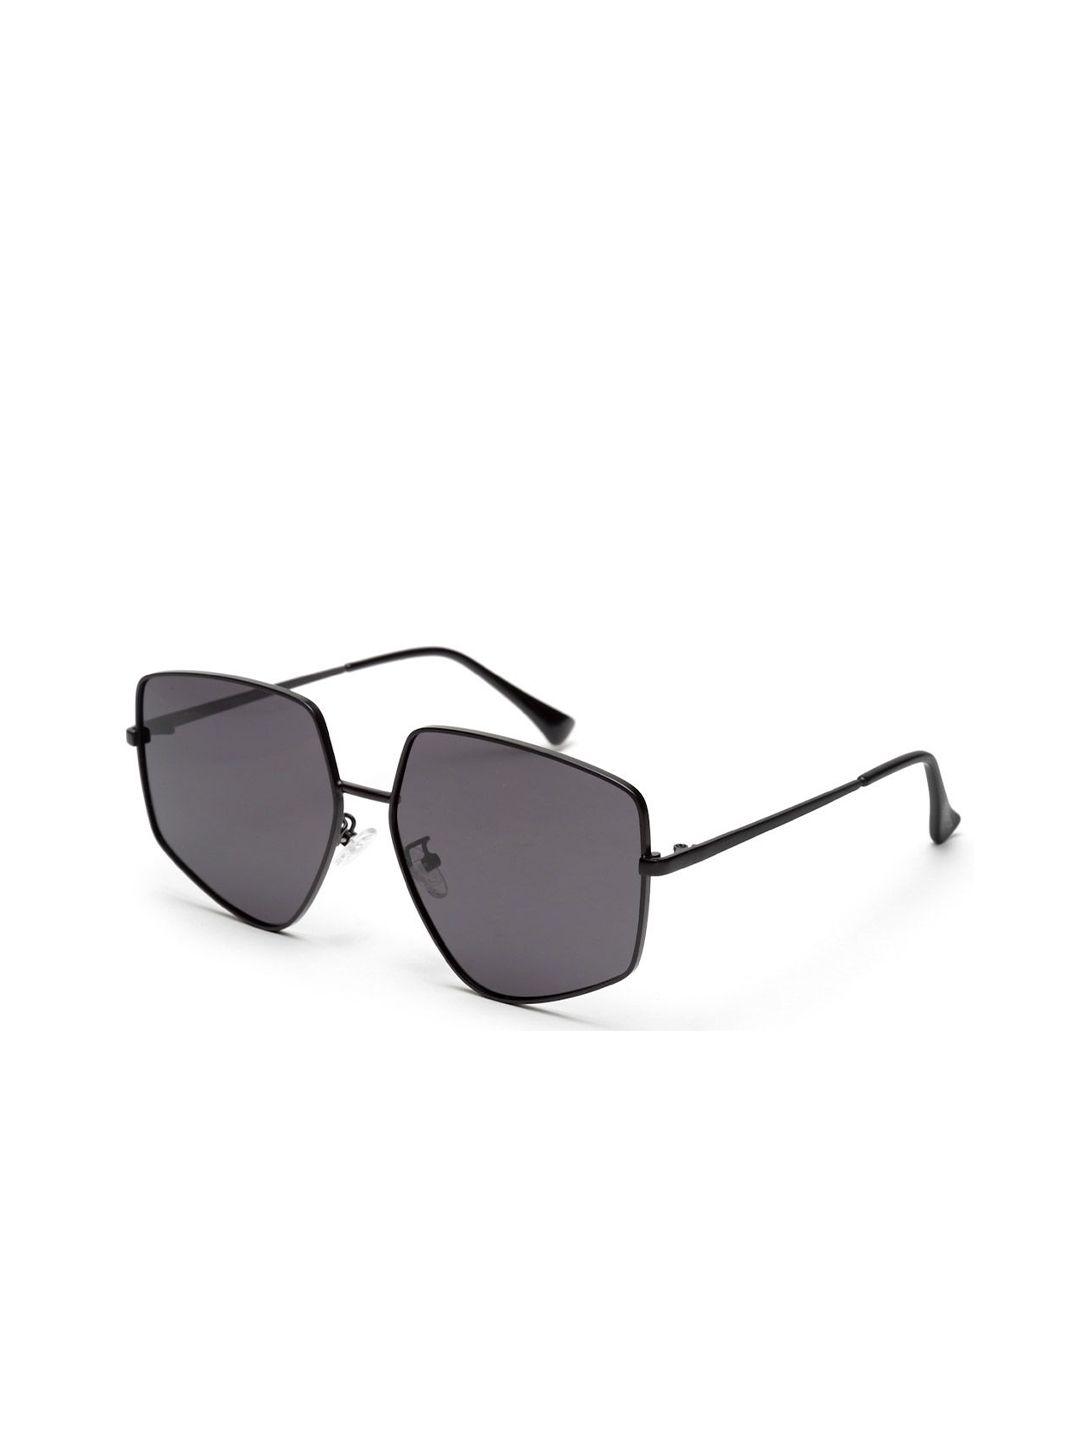 yourspex unisex black lens & black other sunglasses with uv protected lens